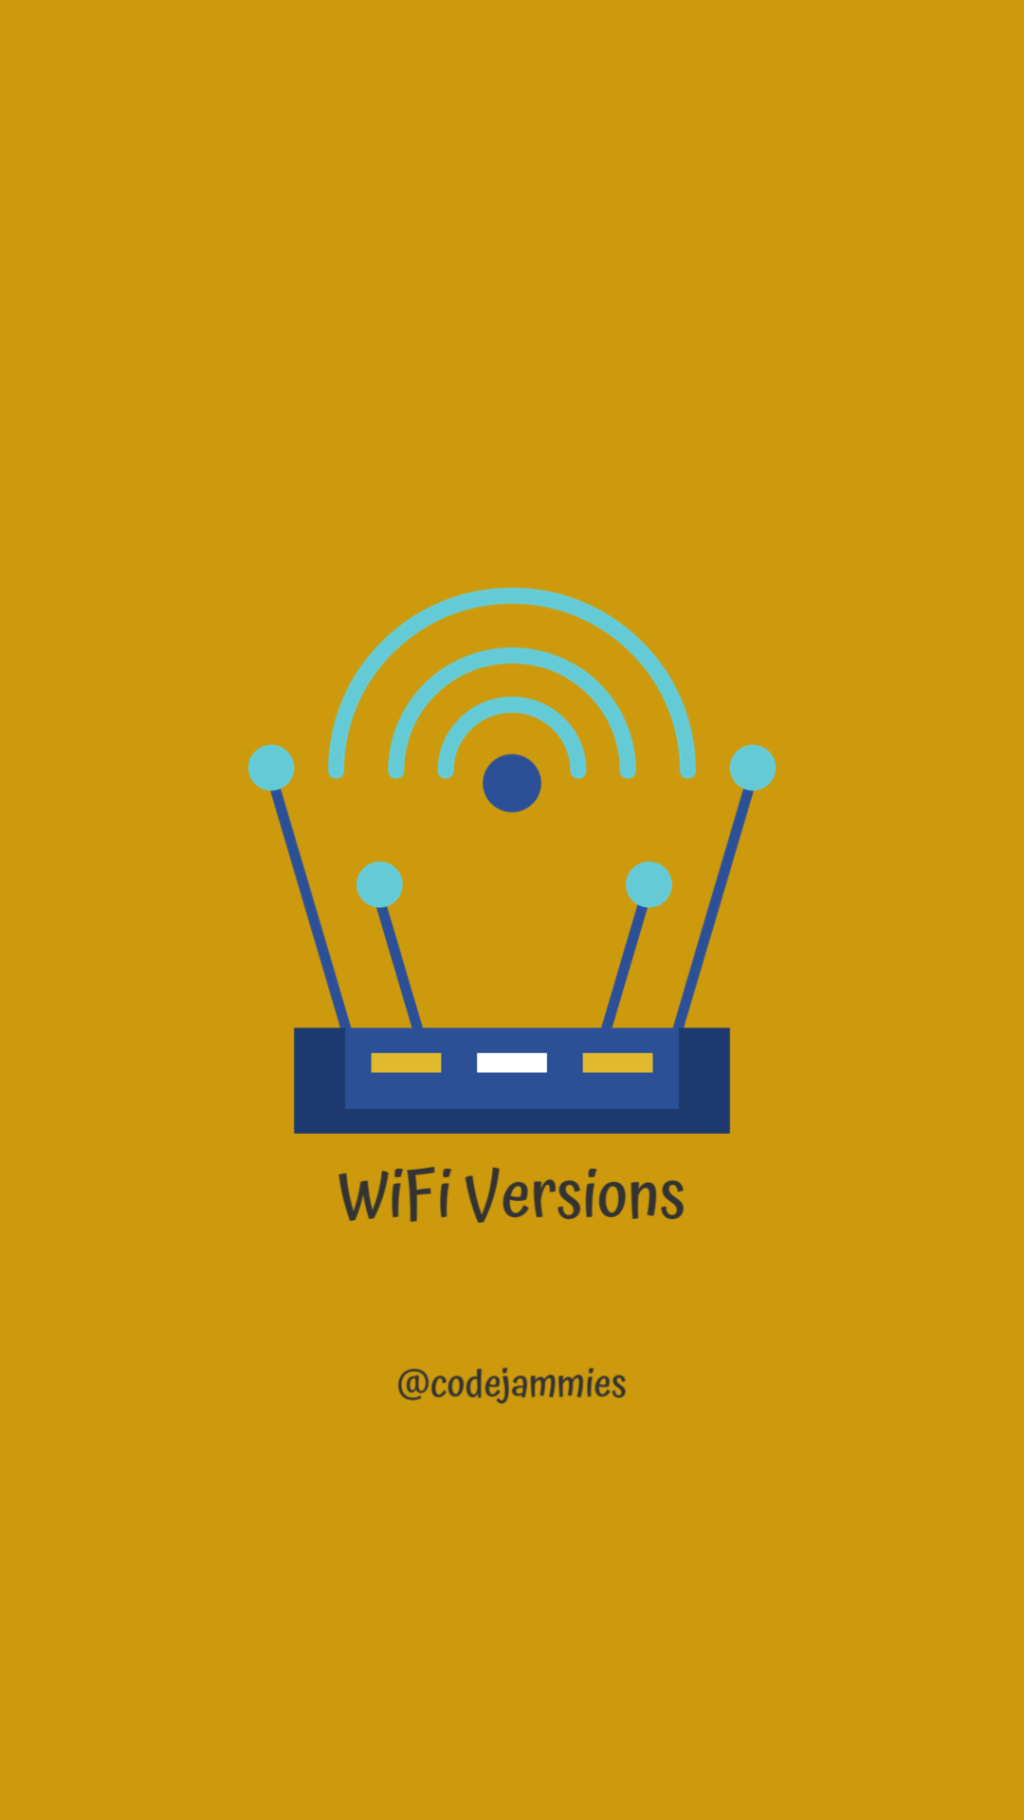 30 Seconds Read: WiFi Versions